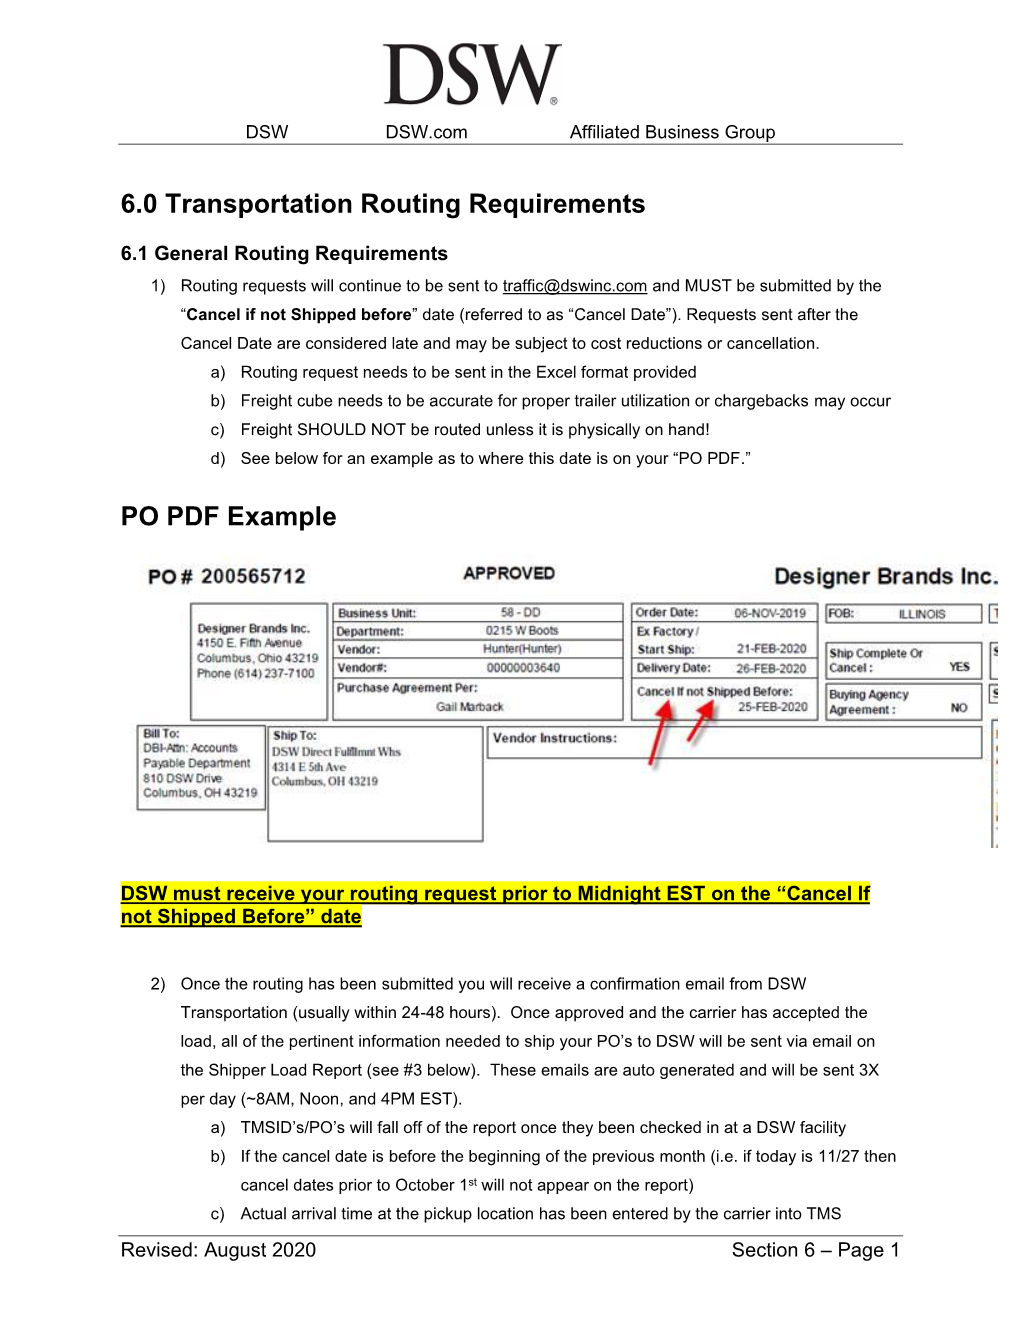 6.0 Transportation Routing Requirements PO PDF Example